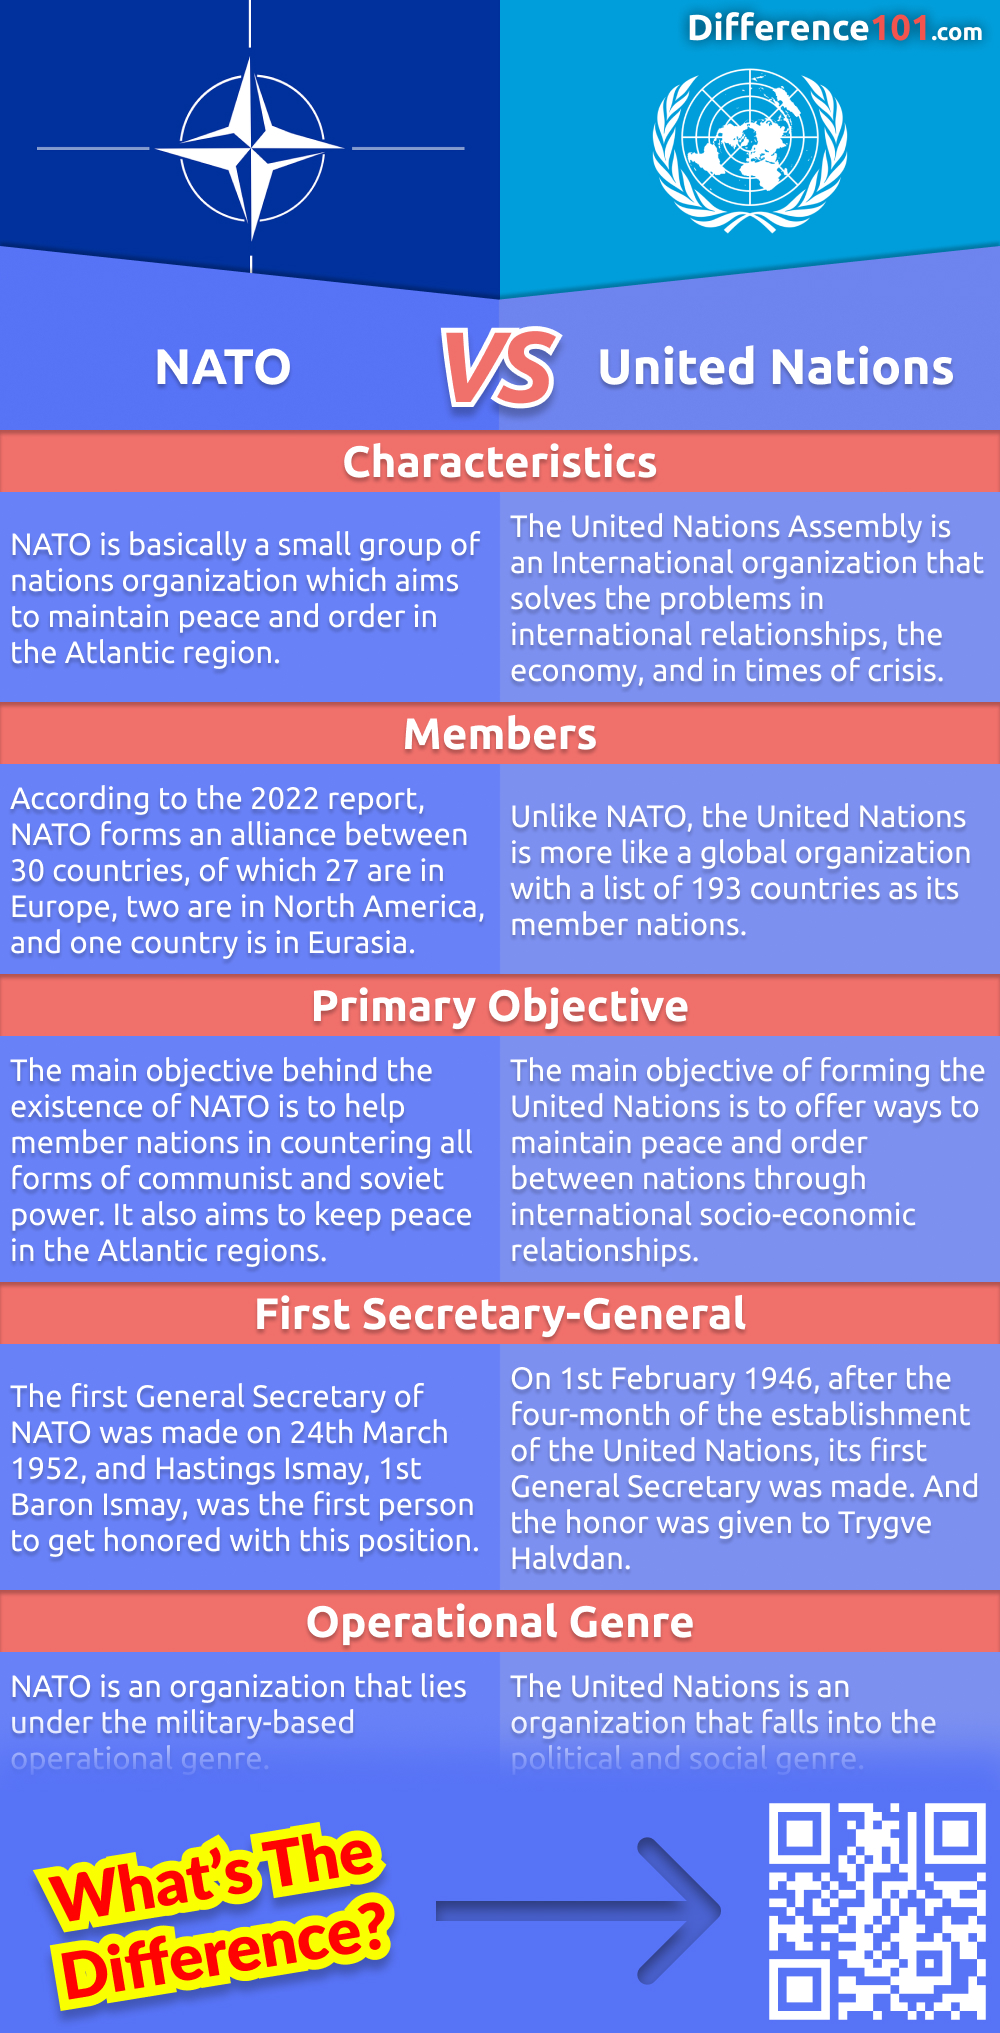 The United Nations and NATO are two of the most important international organizations in the world. But what are the differences between them? Read on to find out the pros and cons of each organization.